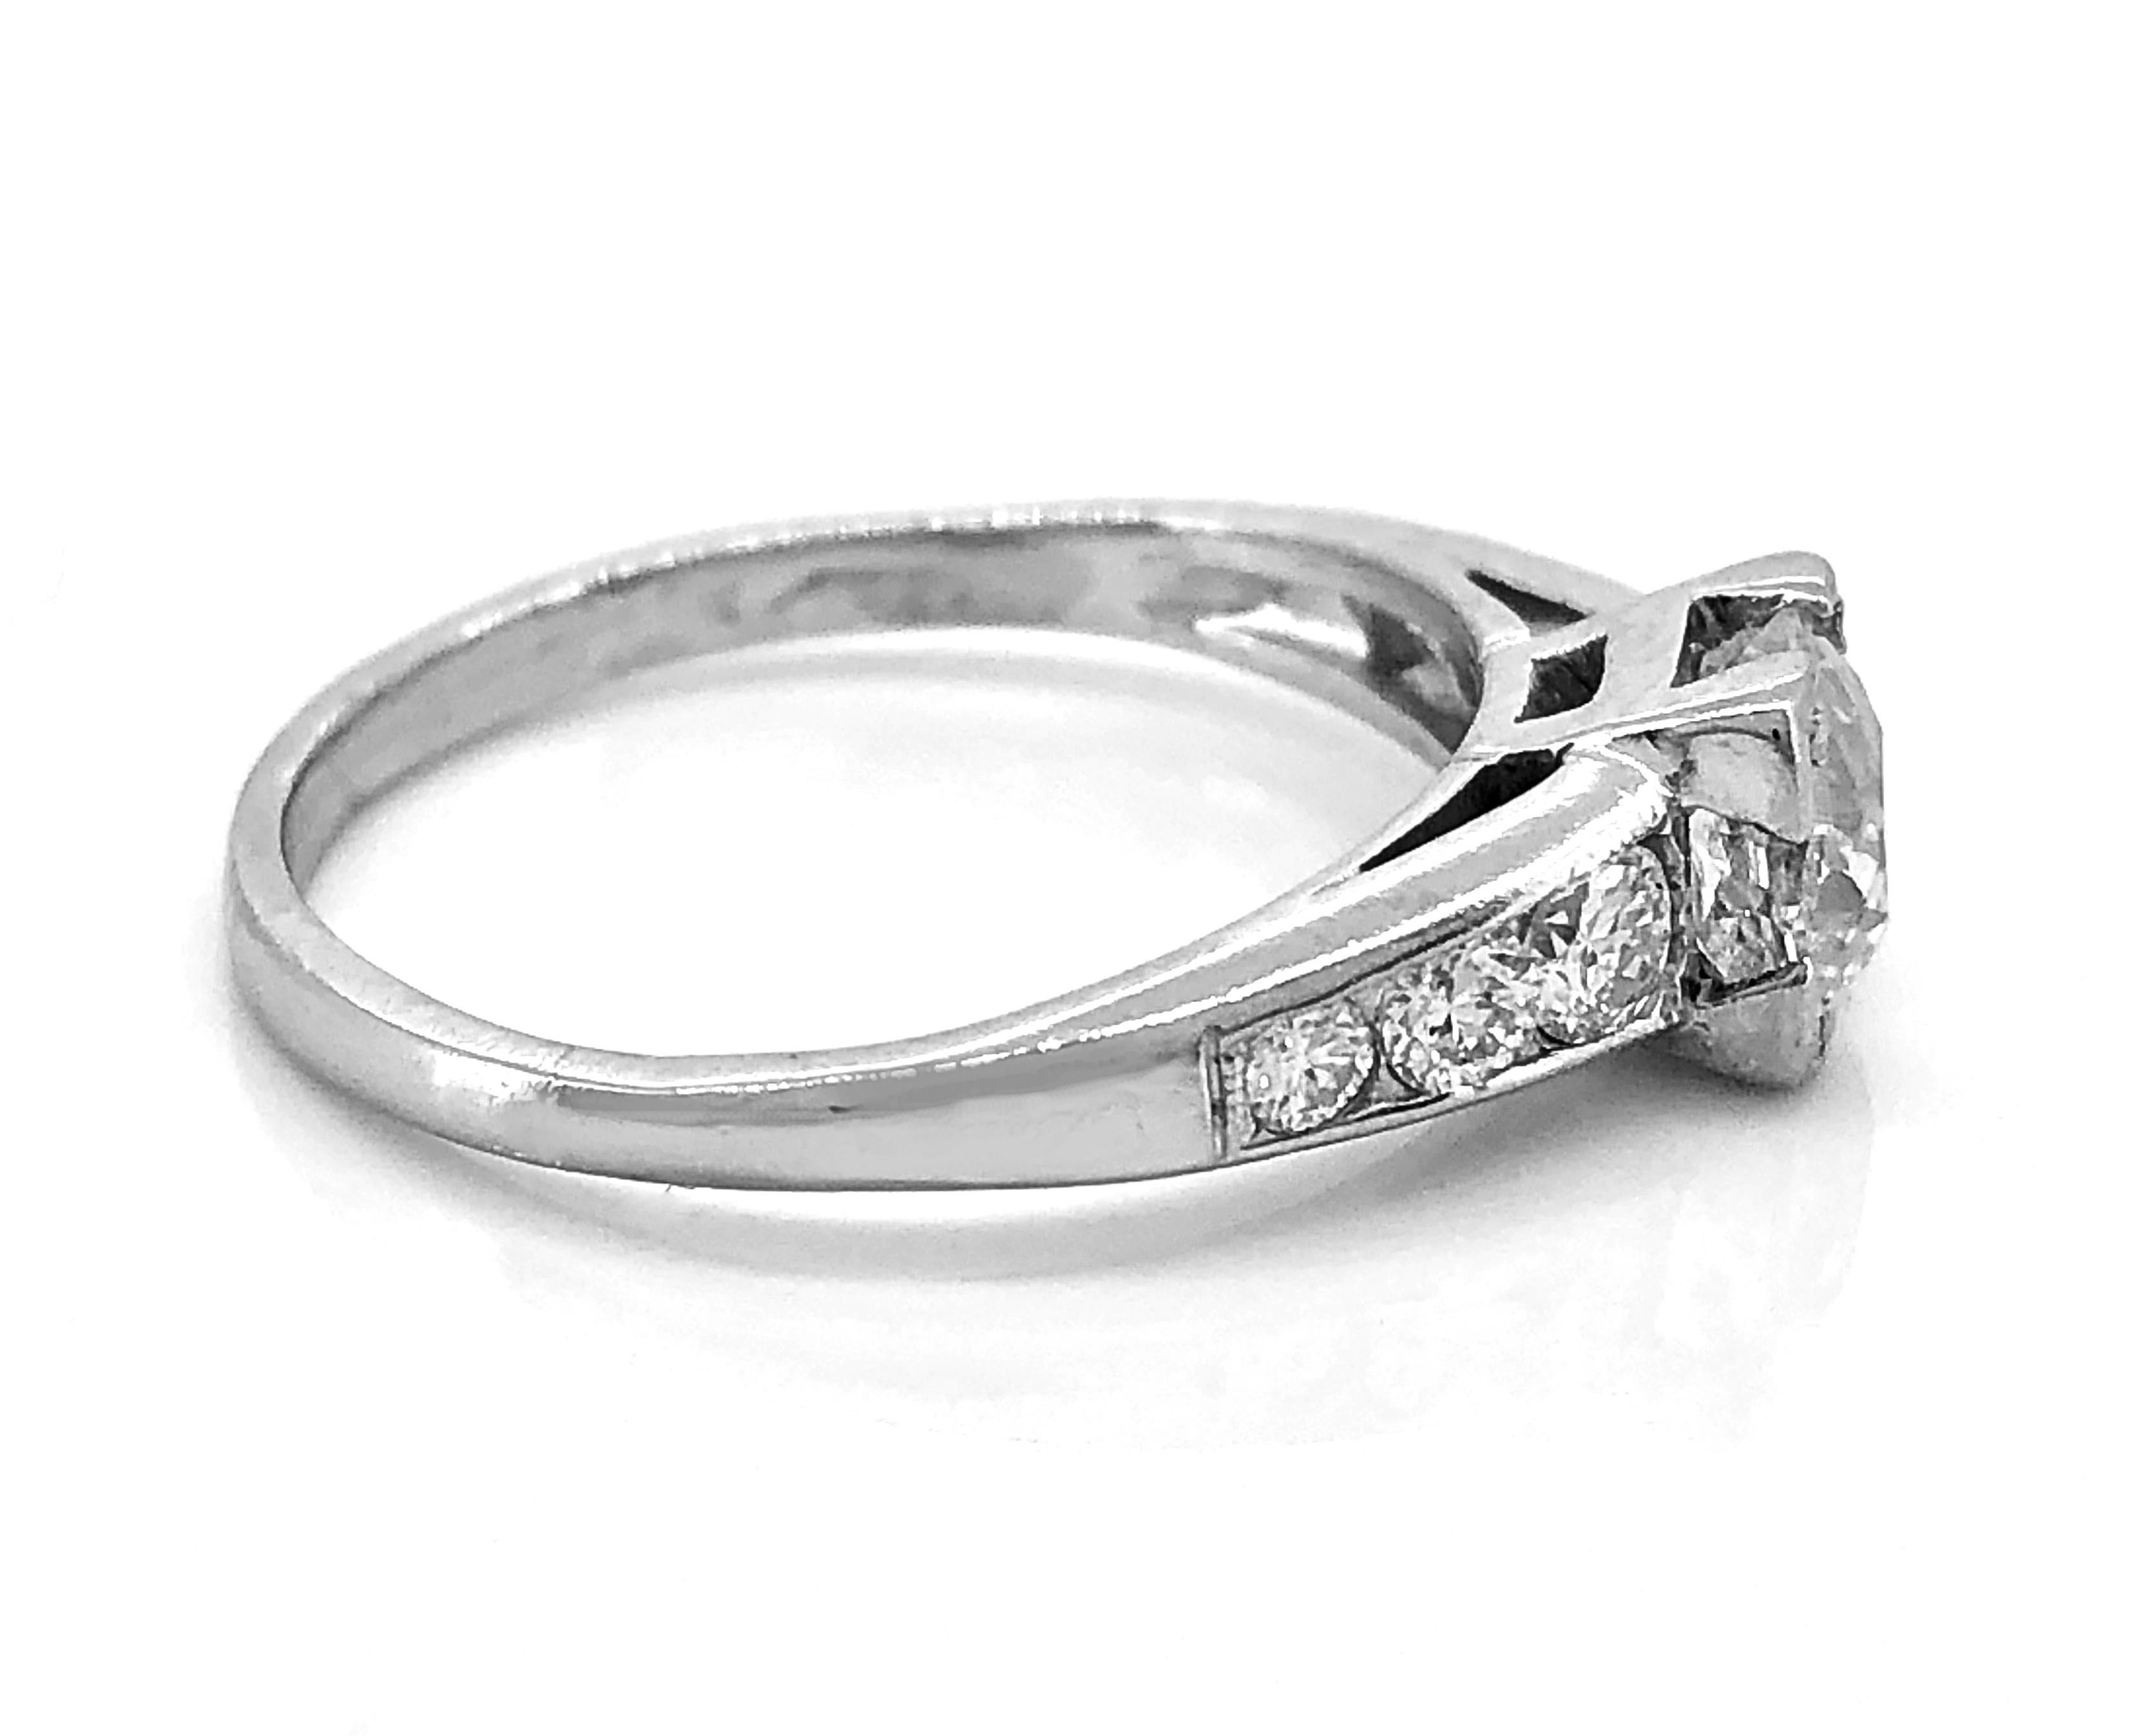 A traditional Art Deco diamond Antique engagement ring featuring a center European cut diamond weighing .43ct. Apx. with SI1 clarity and H color. The transitional cut diamonds on the shoulders weigh .20ct. Apx. T.W. with VS2-I1 clarity (eye clean)